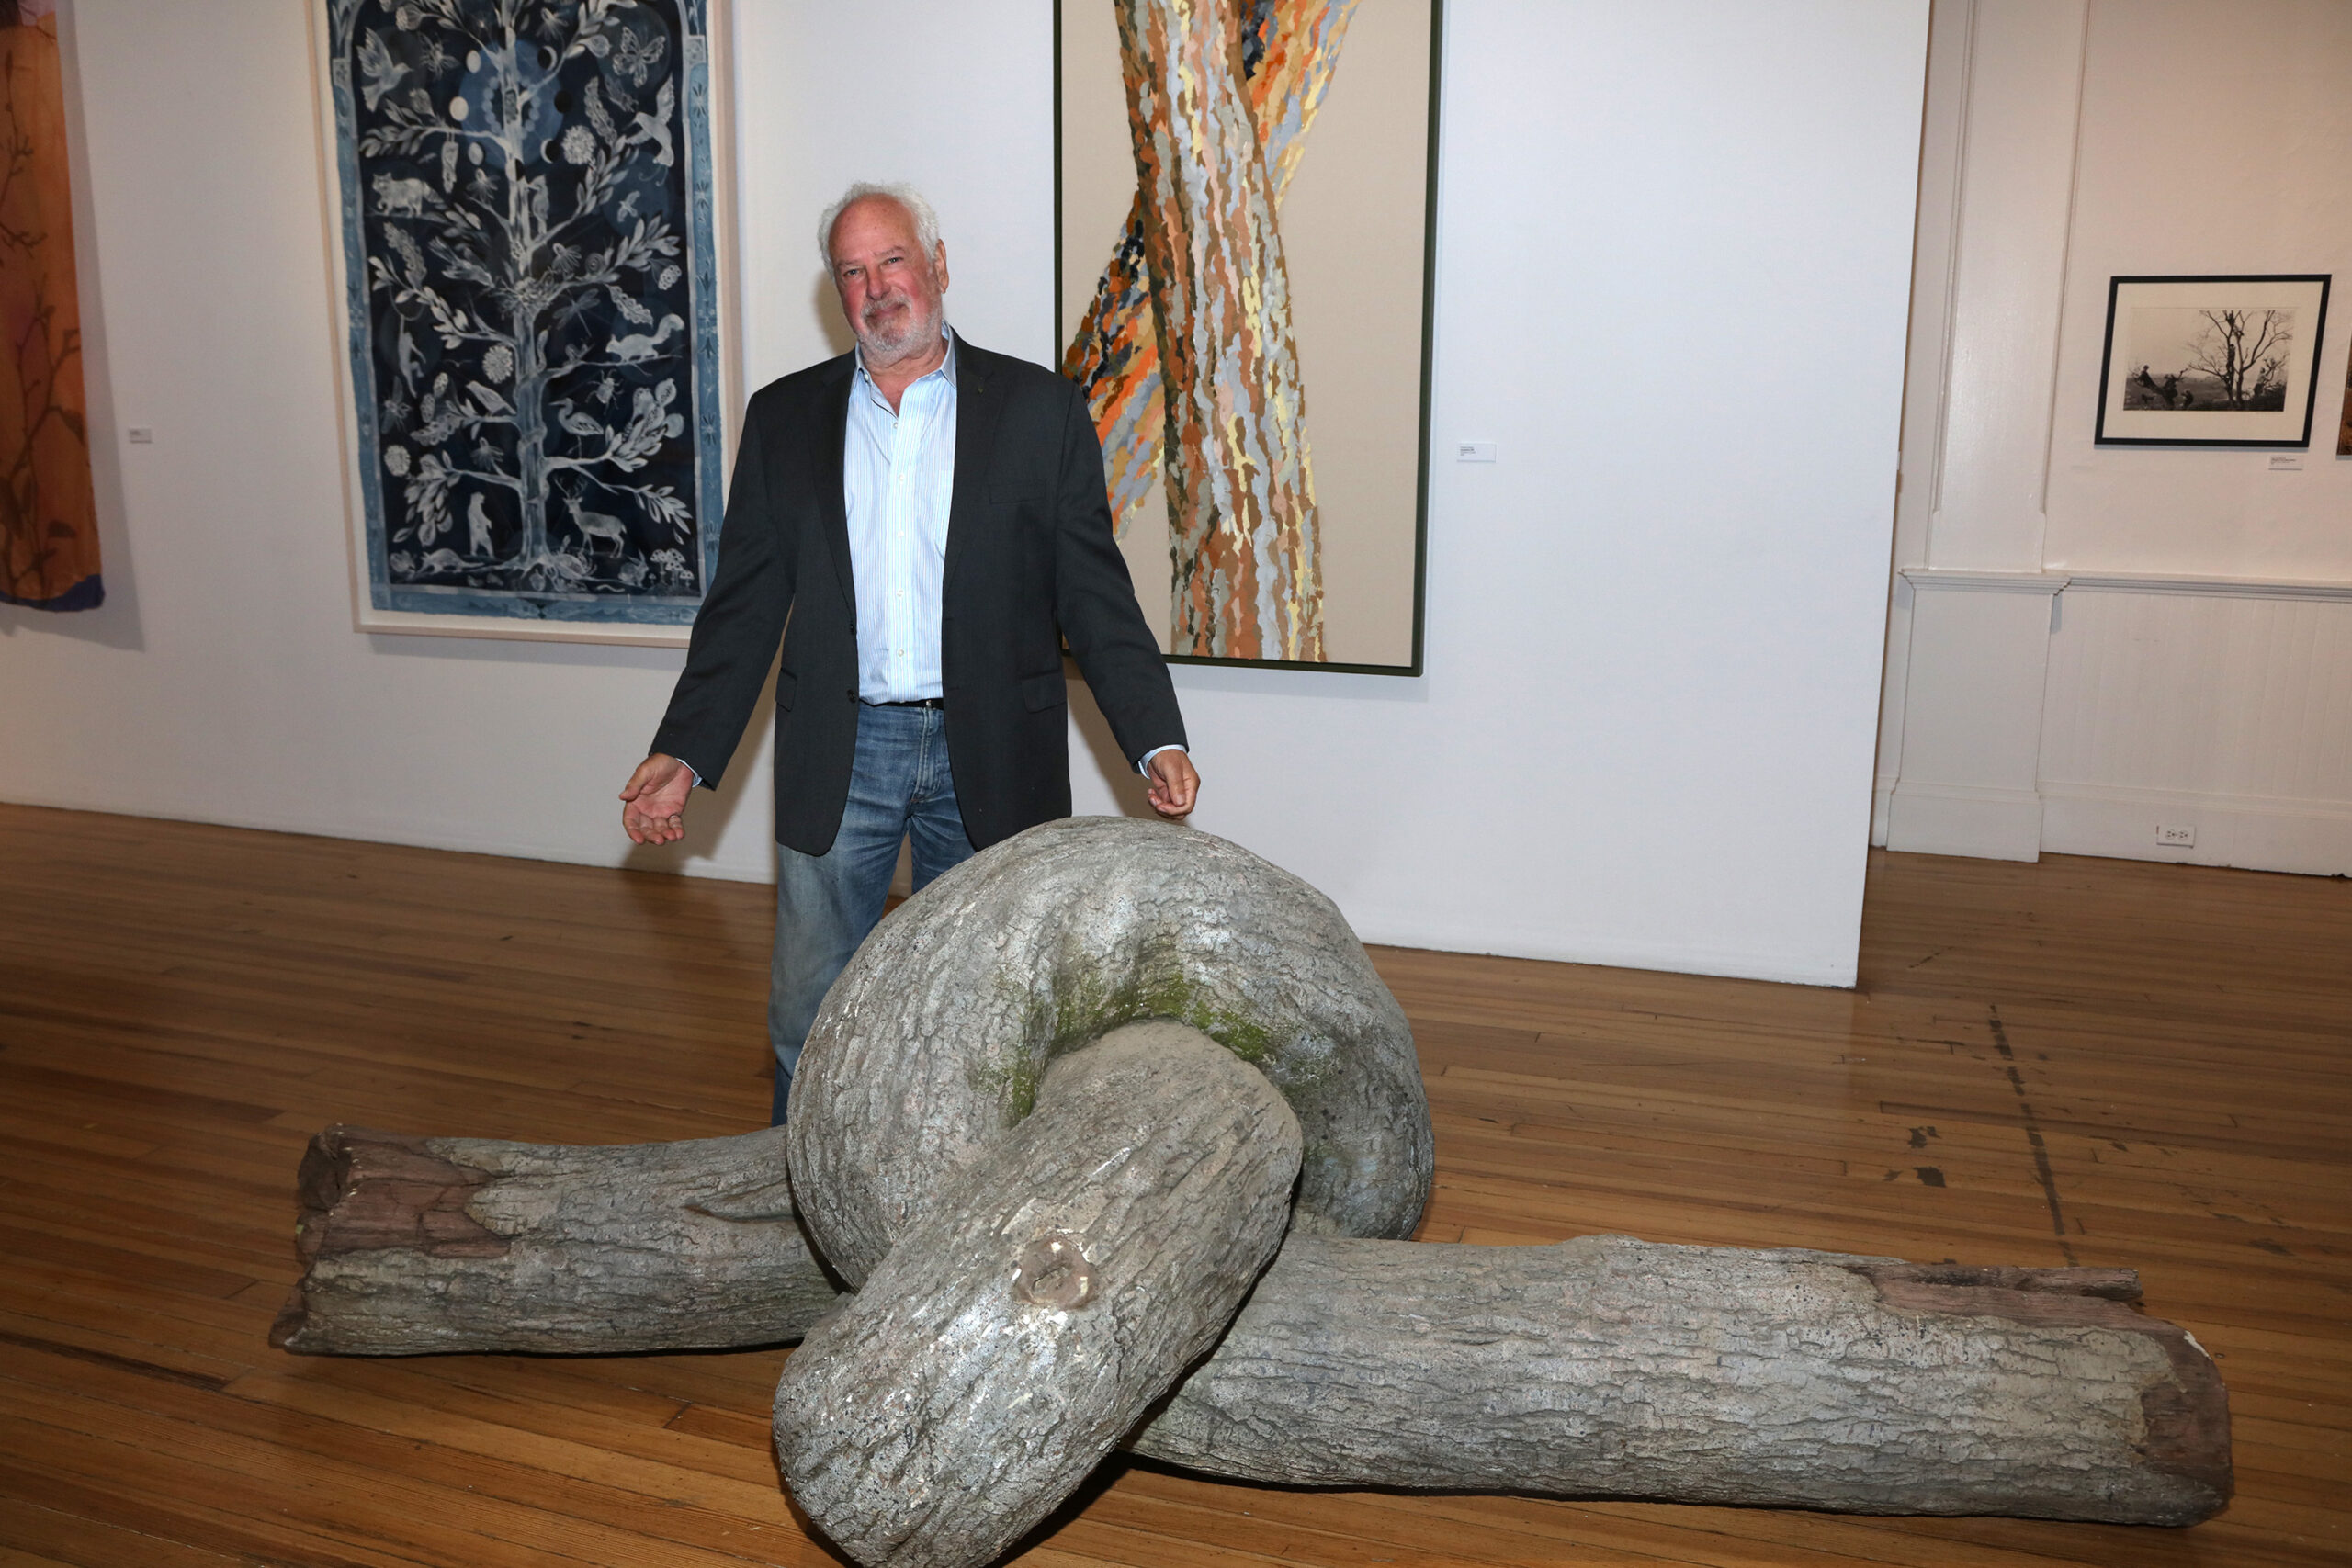 Artist Donal Lipski with his work at the October 1 opening of 